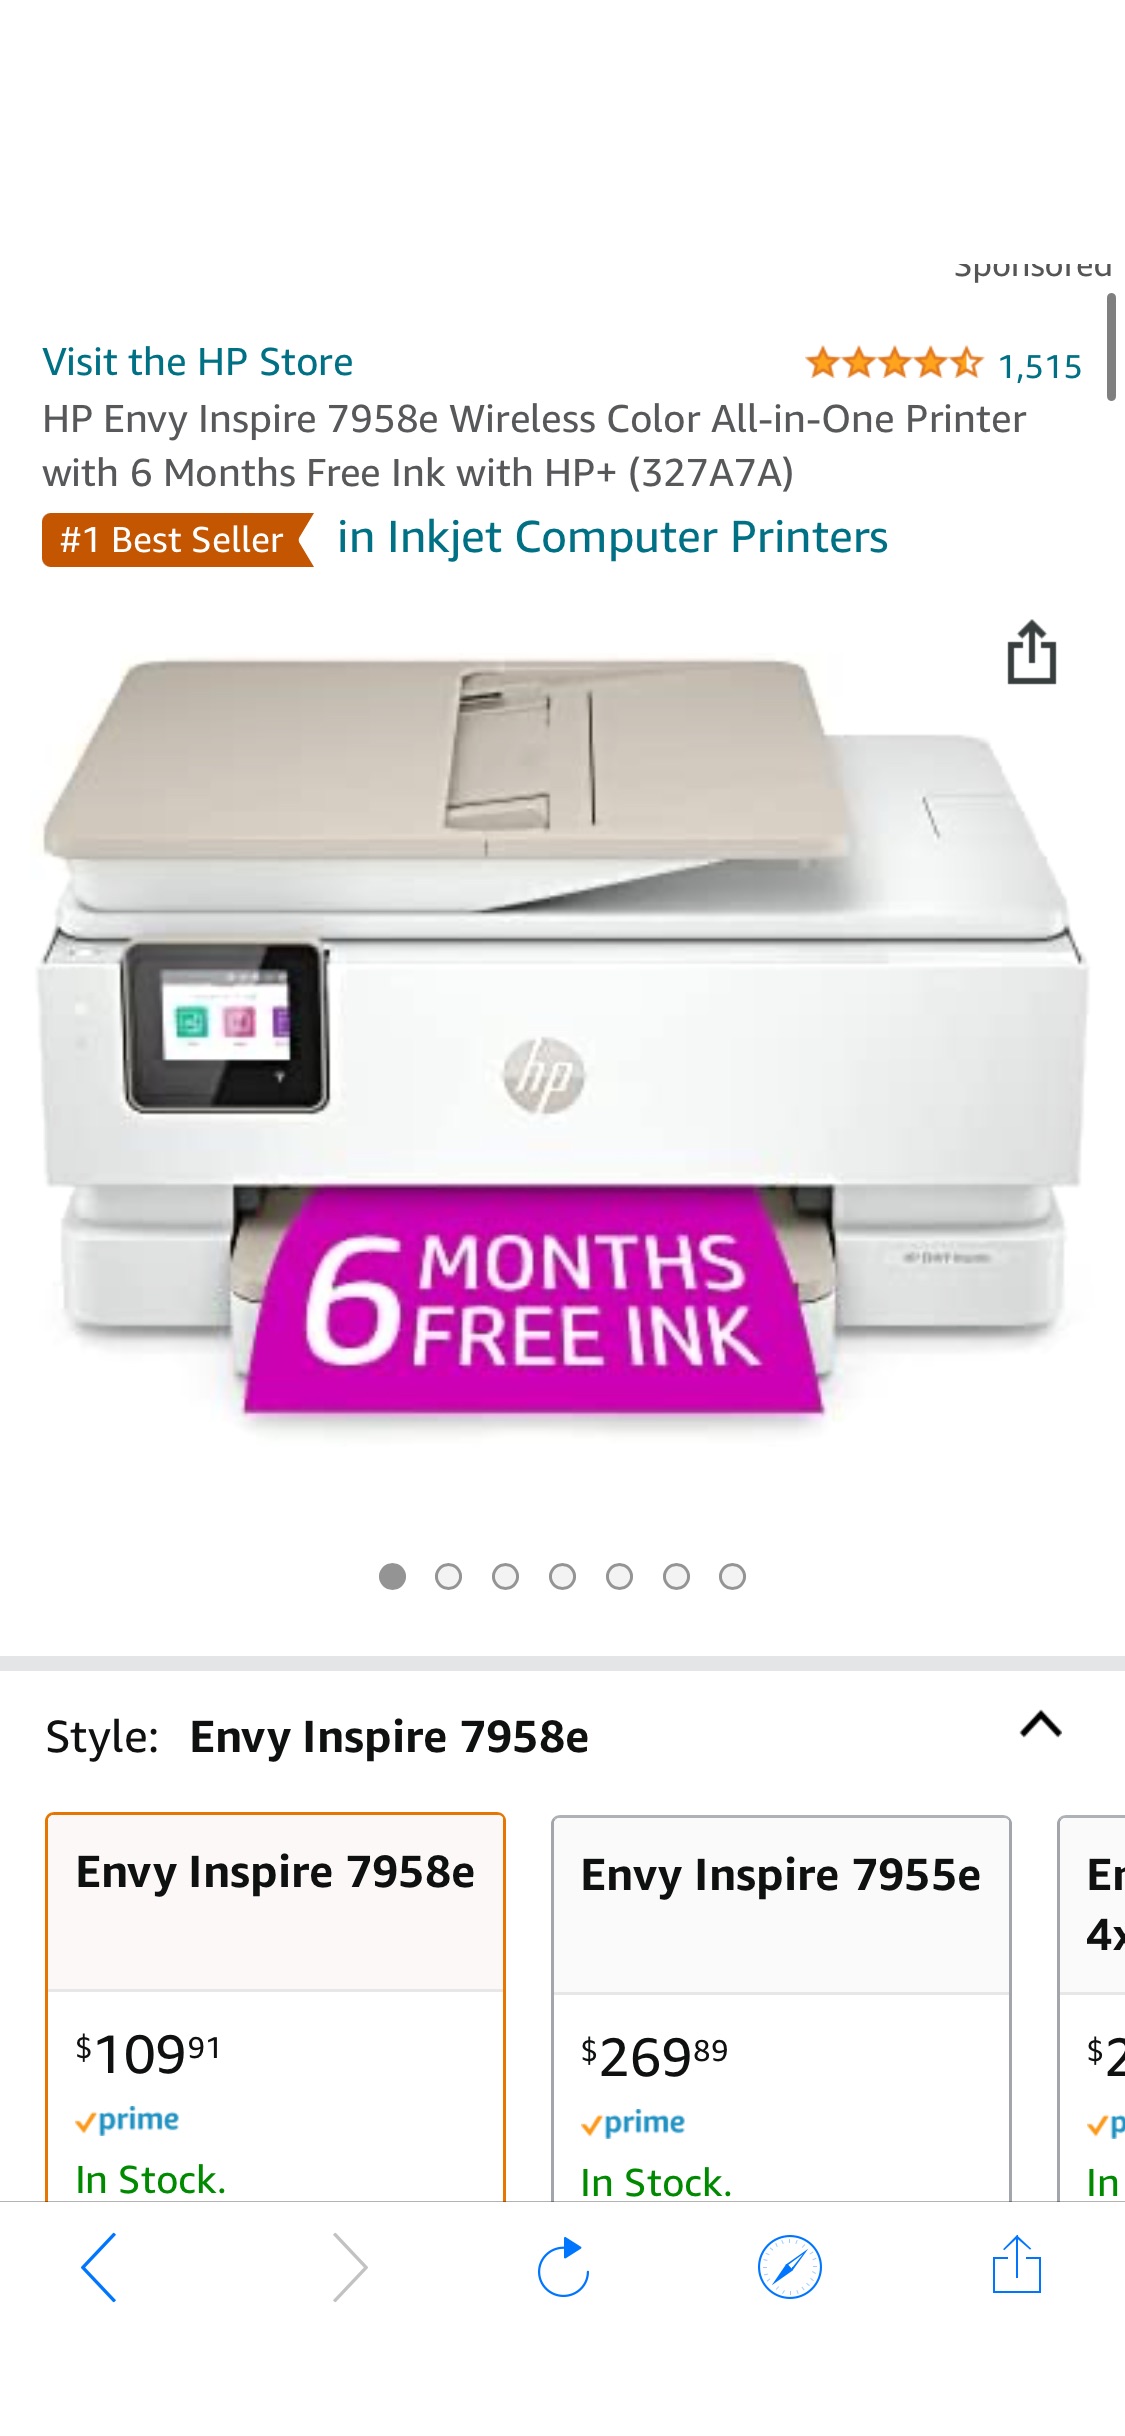 Amazon.com: HP Envy Inspire 7958e Wireless Color All-in-One Printer with 6 Months Free Ink with HP+ (327A7A) : Office Products打印机